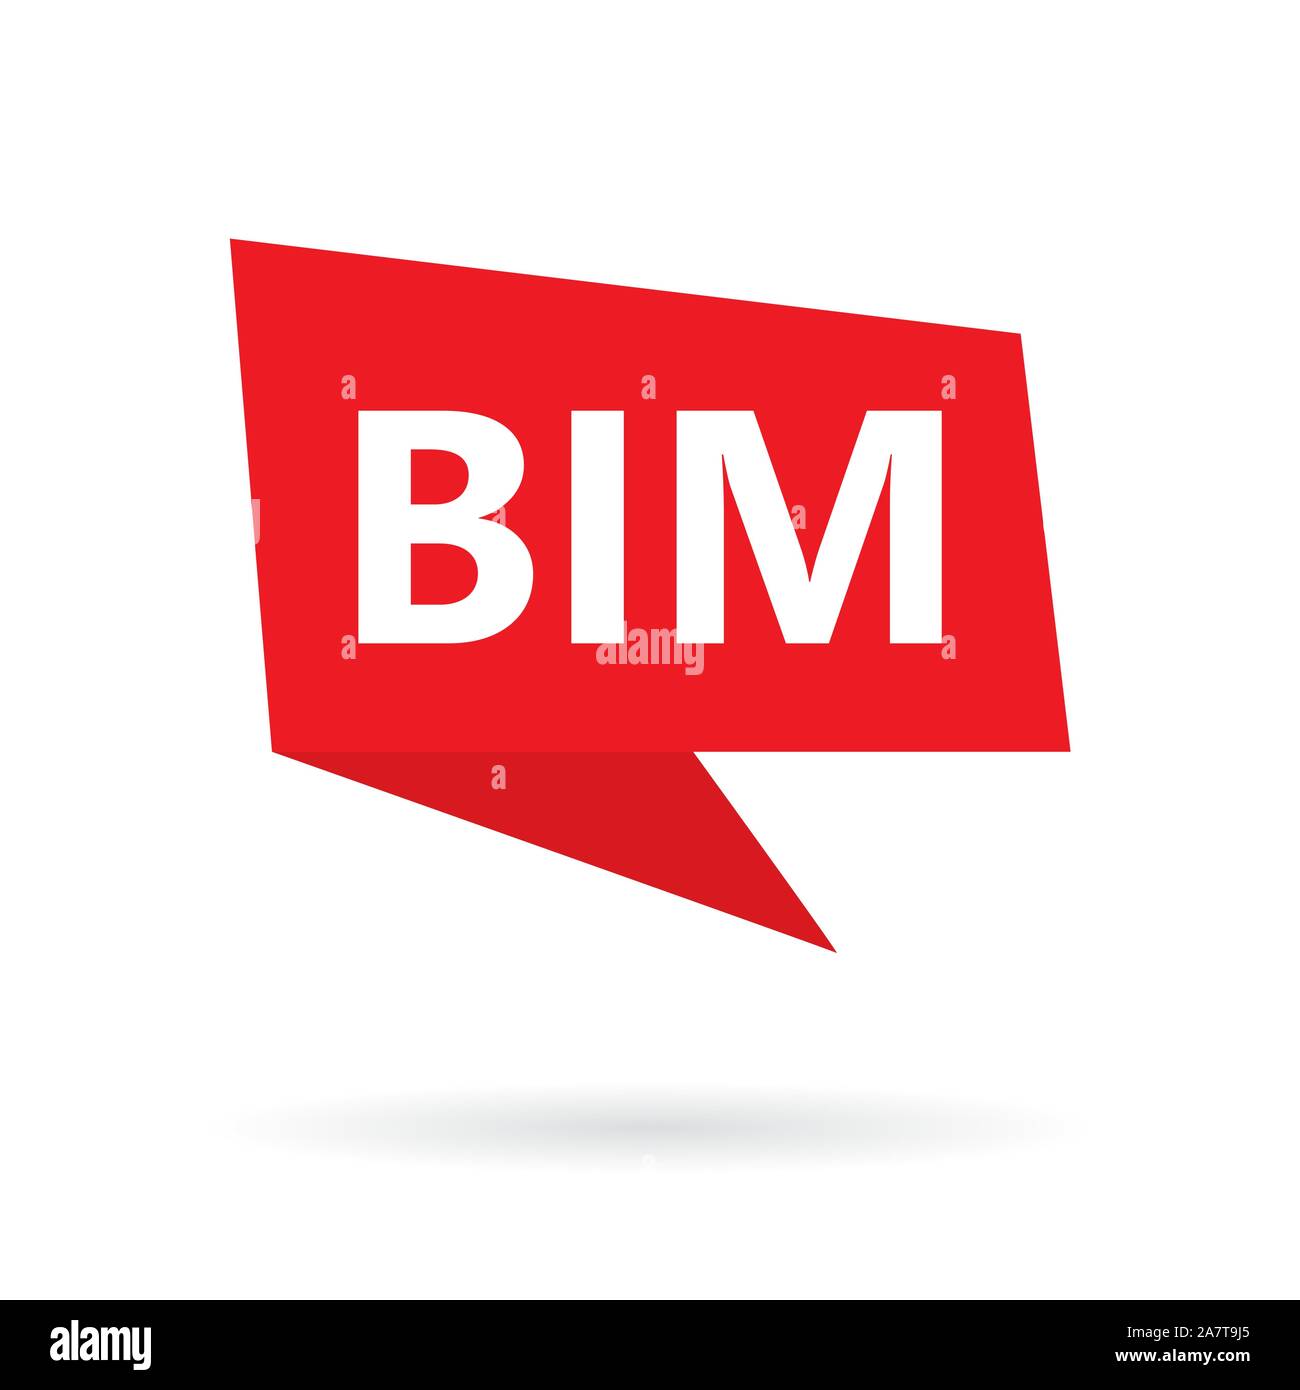 Bim icon Cut Out Stock Images & Pictures - Alamy